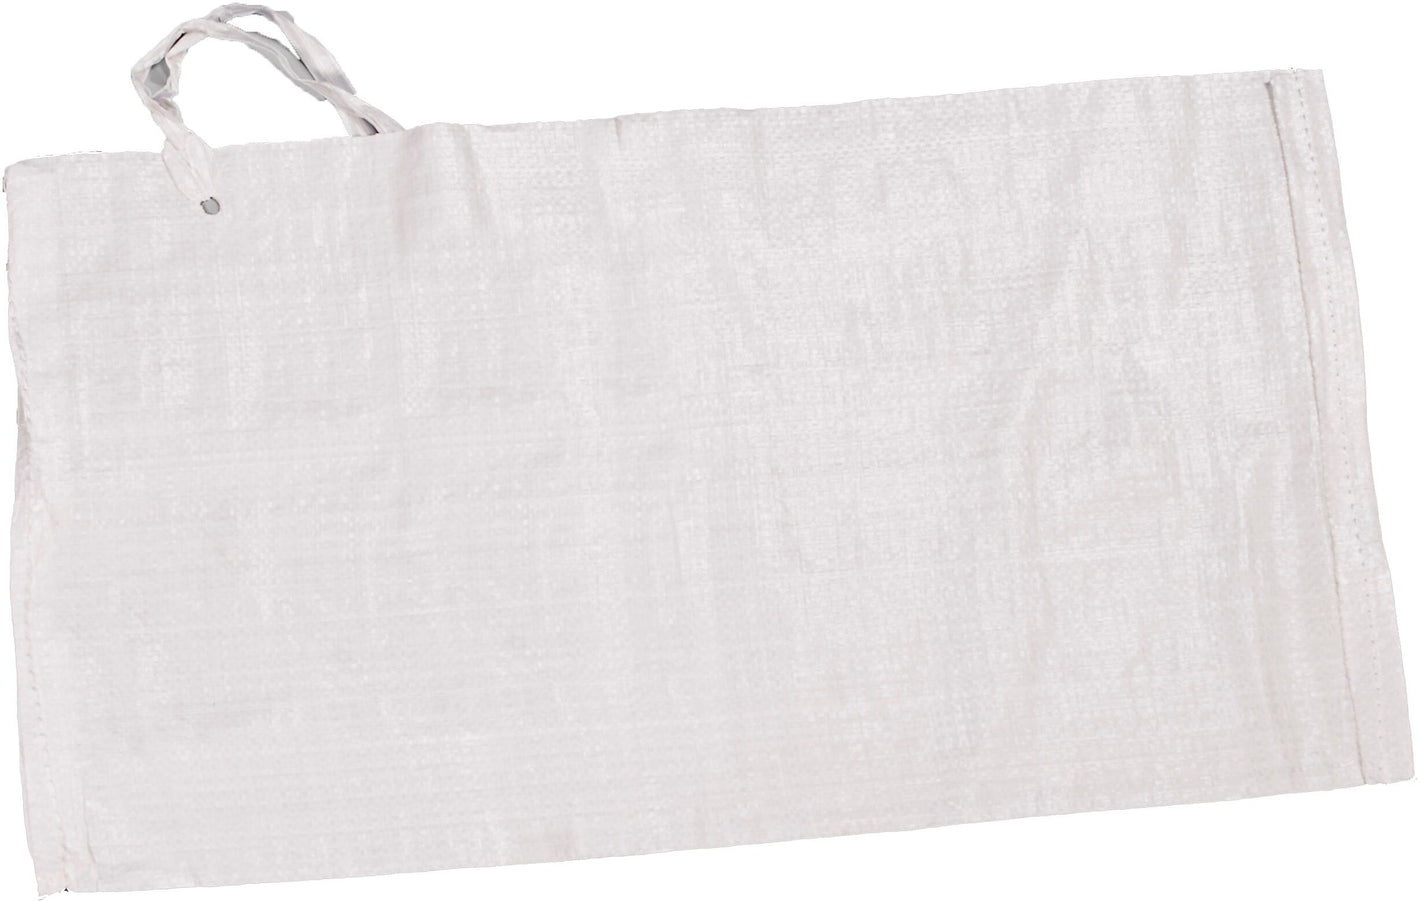 Mutual Industries Sand Bag, 14"x 26", White, 1000/Pack